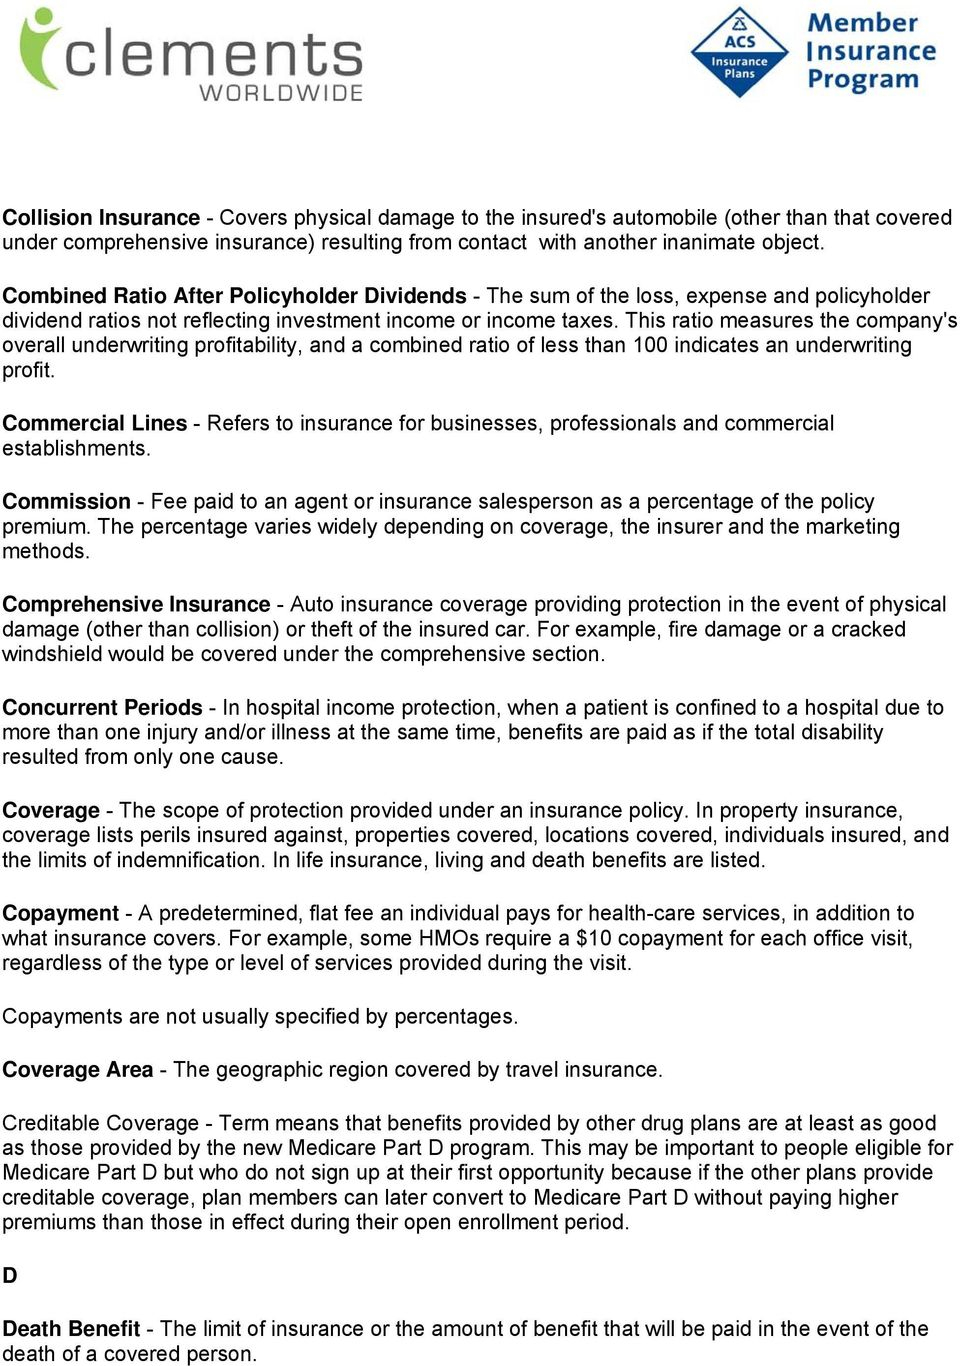 Insurance Terms Glossary Pdf Free Download throughout sizing 960 X 1366